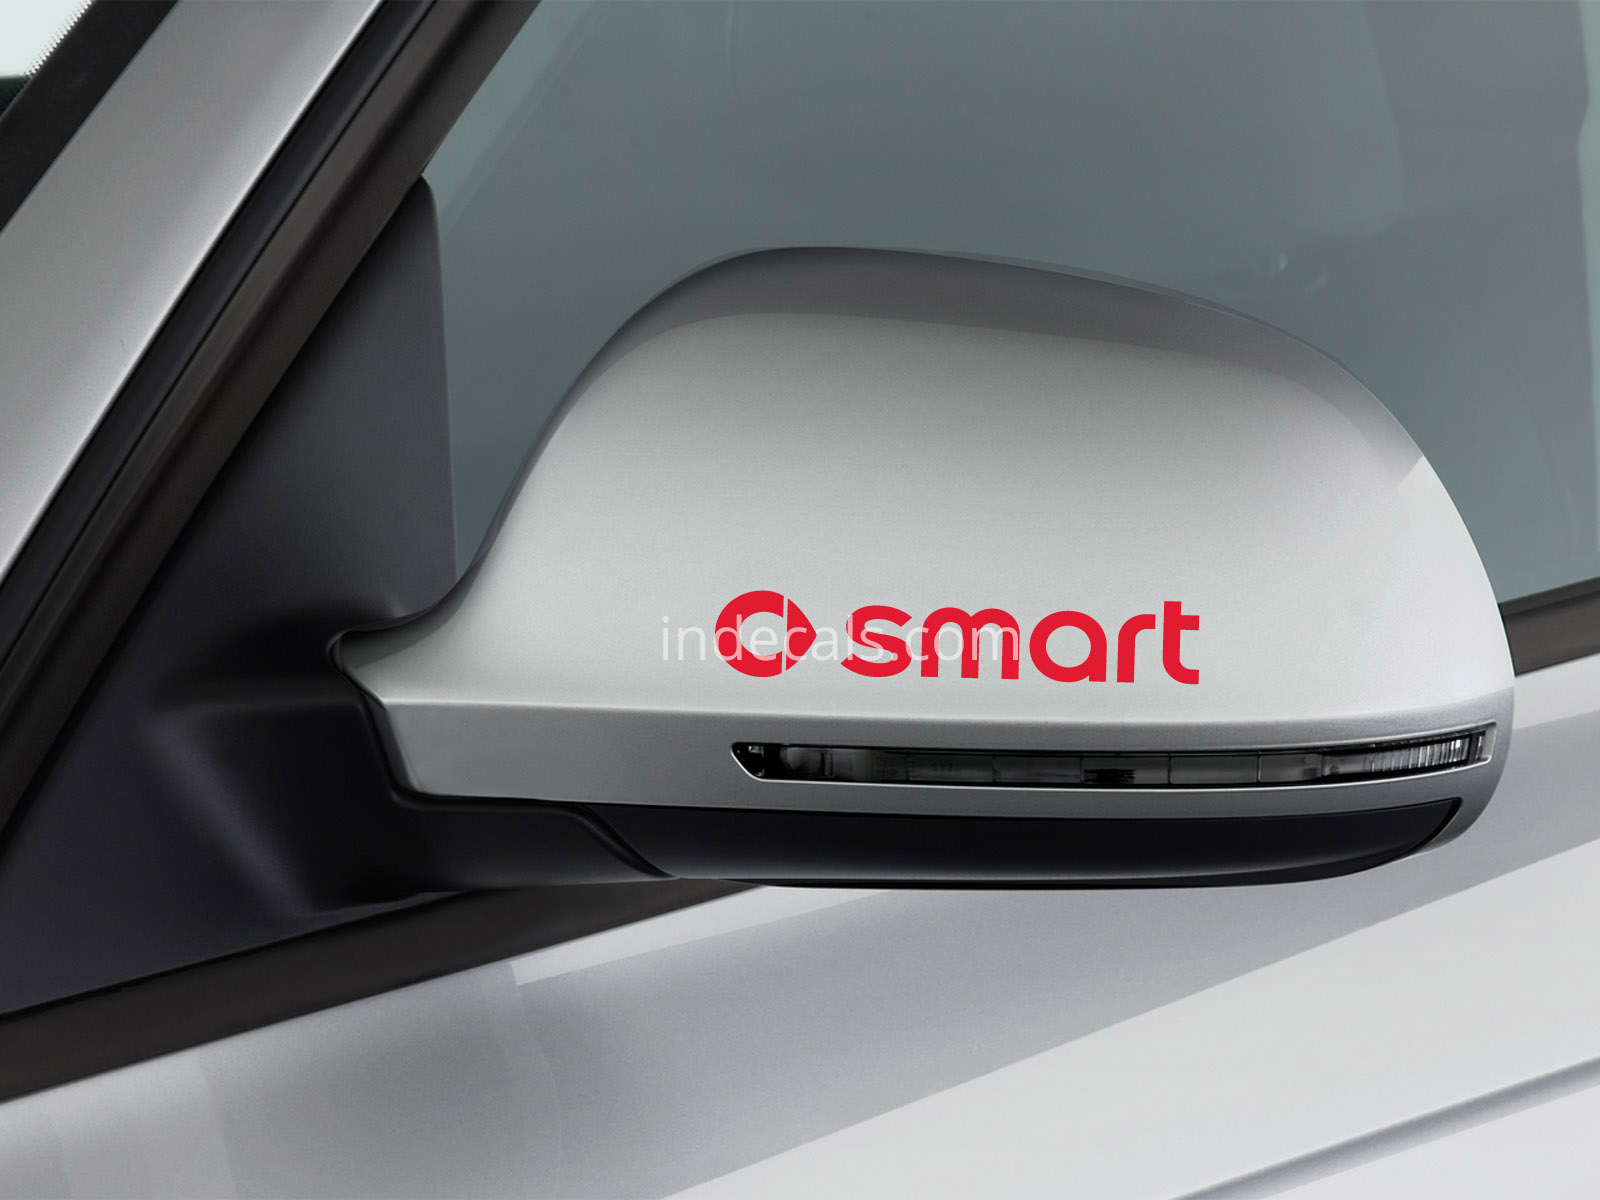 3 x Smart Stickers for Mirrors - Red